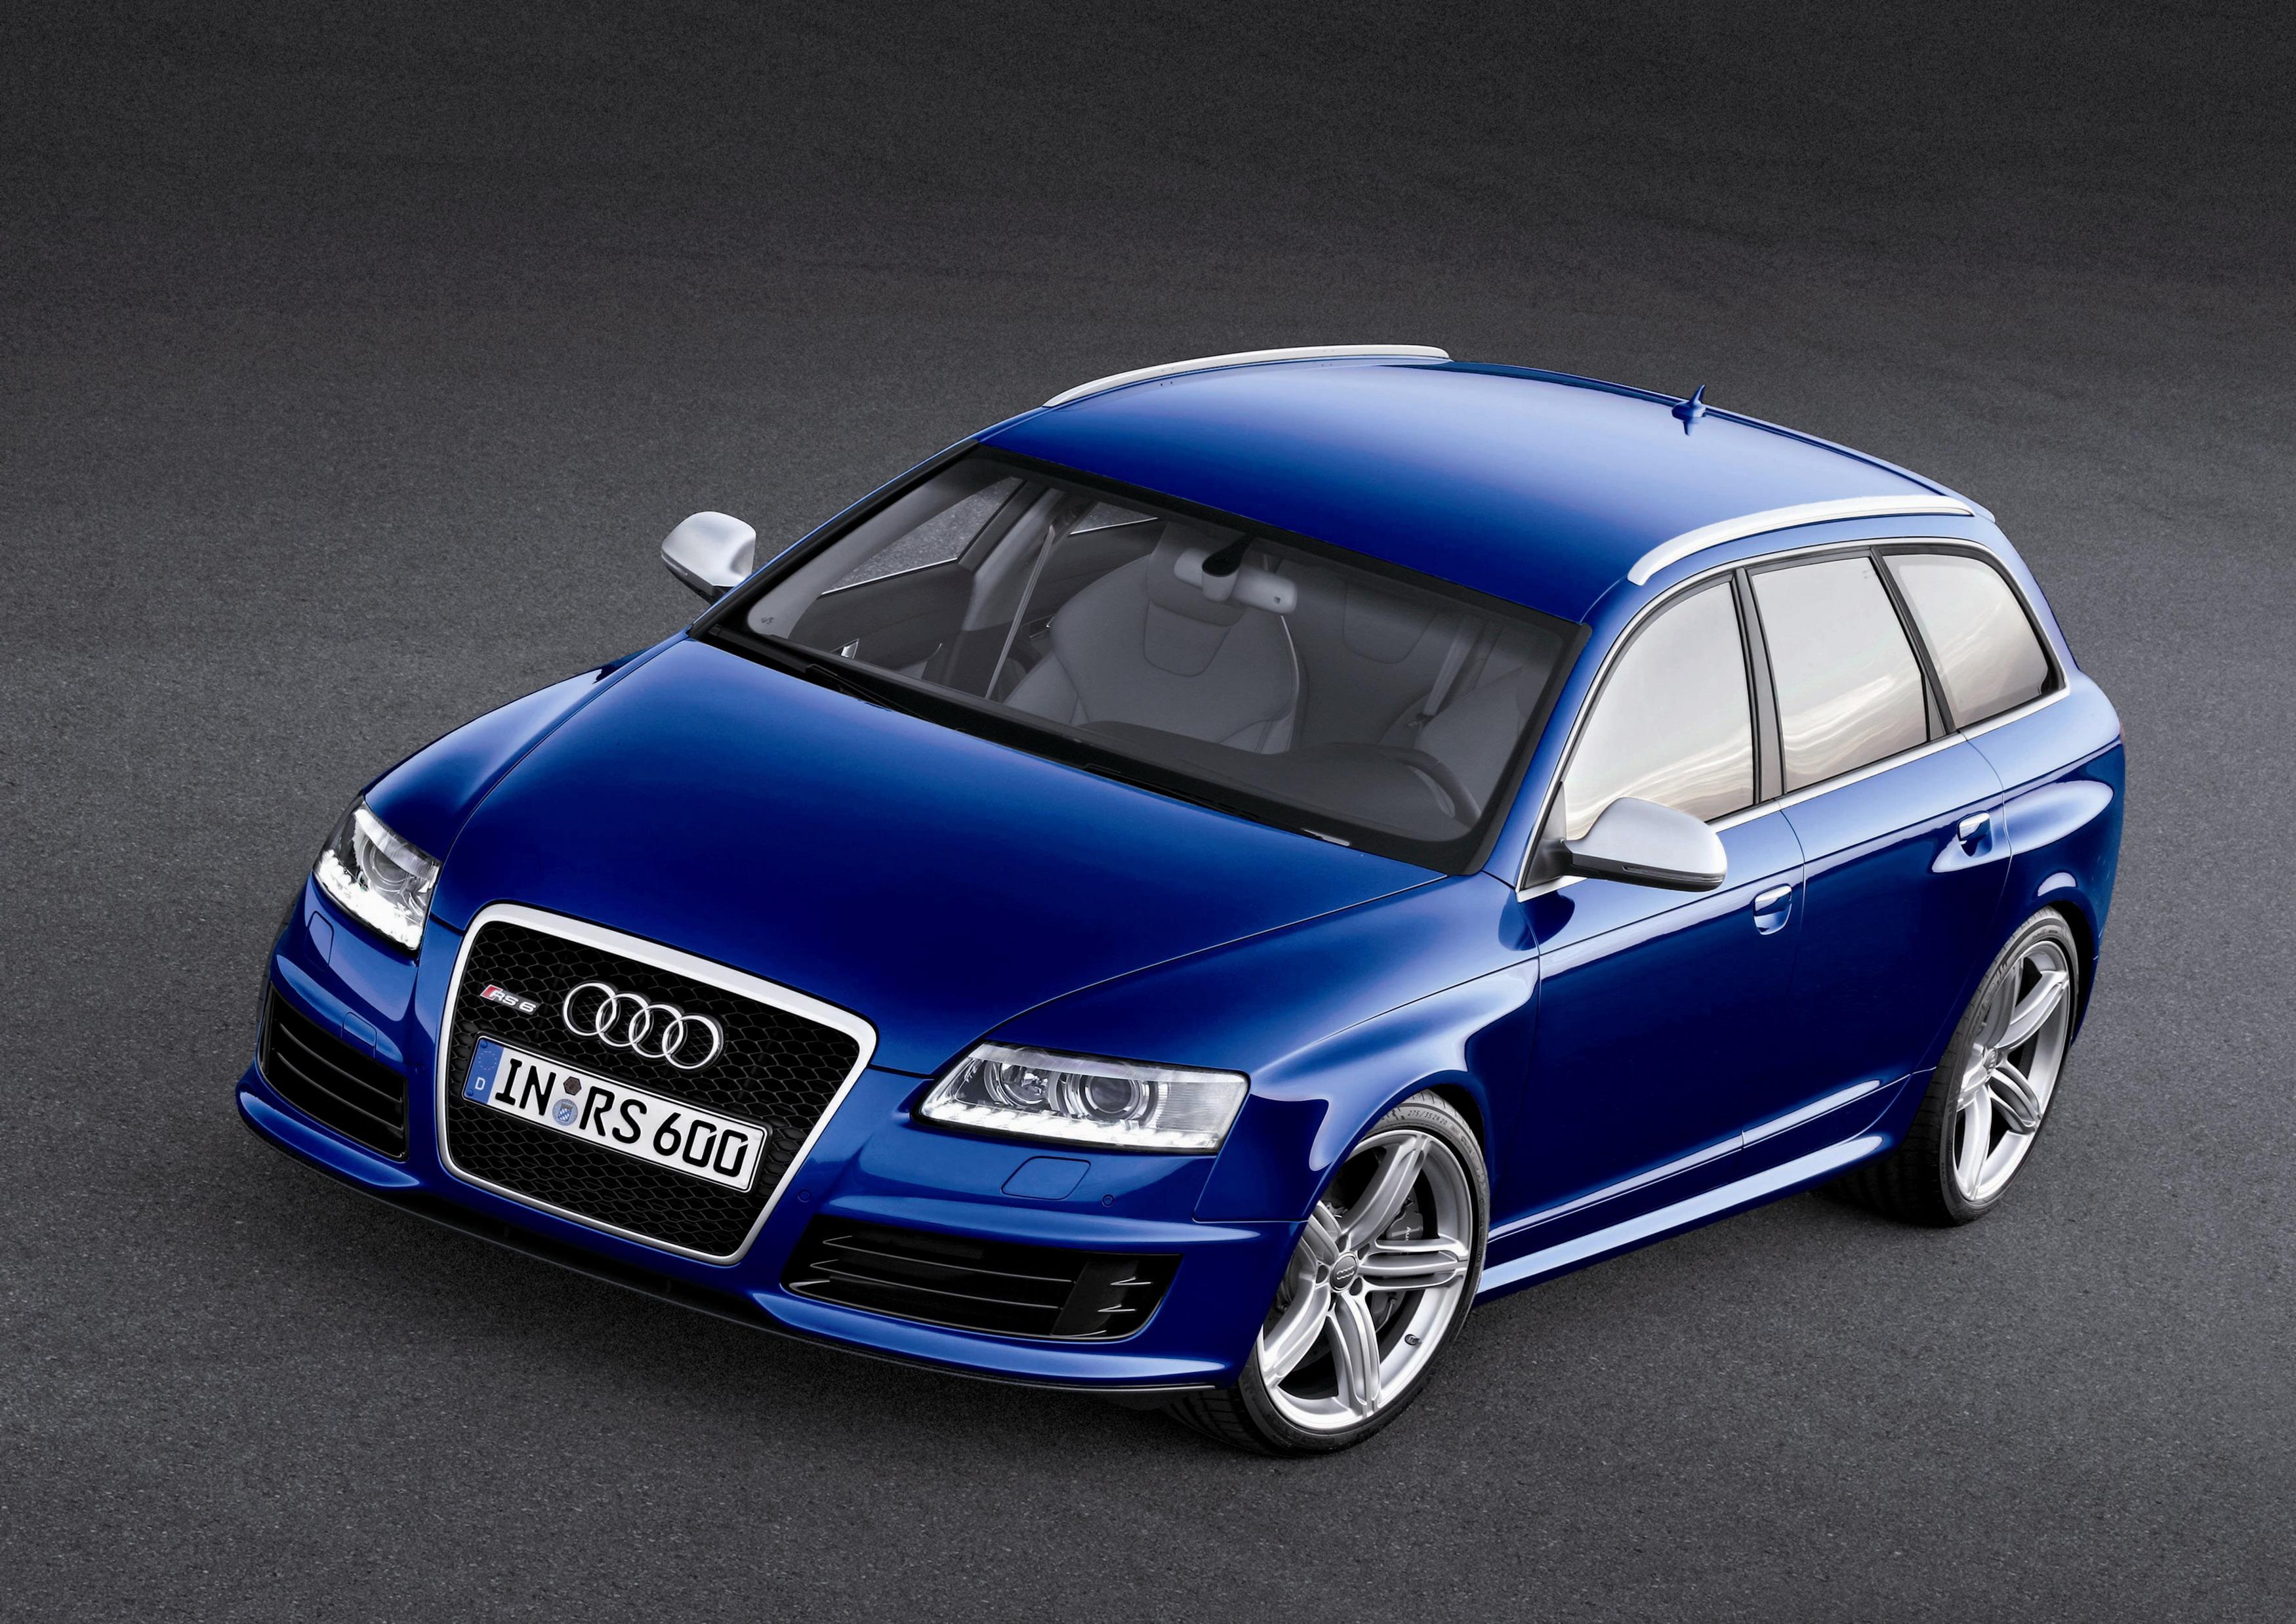 Audi RS 6 Avant wagon specifications